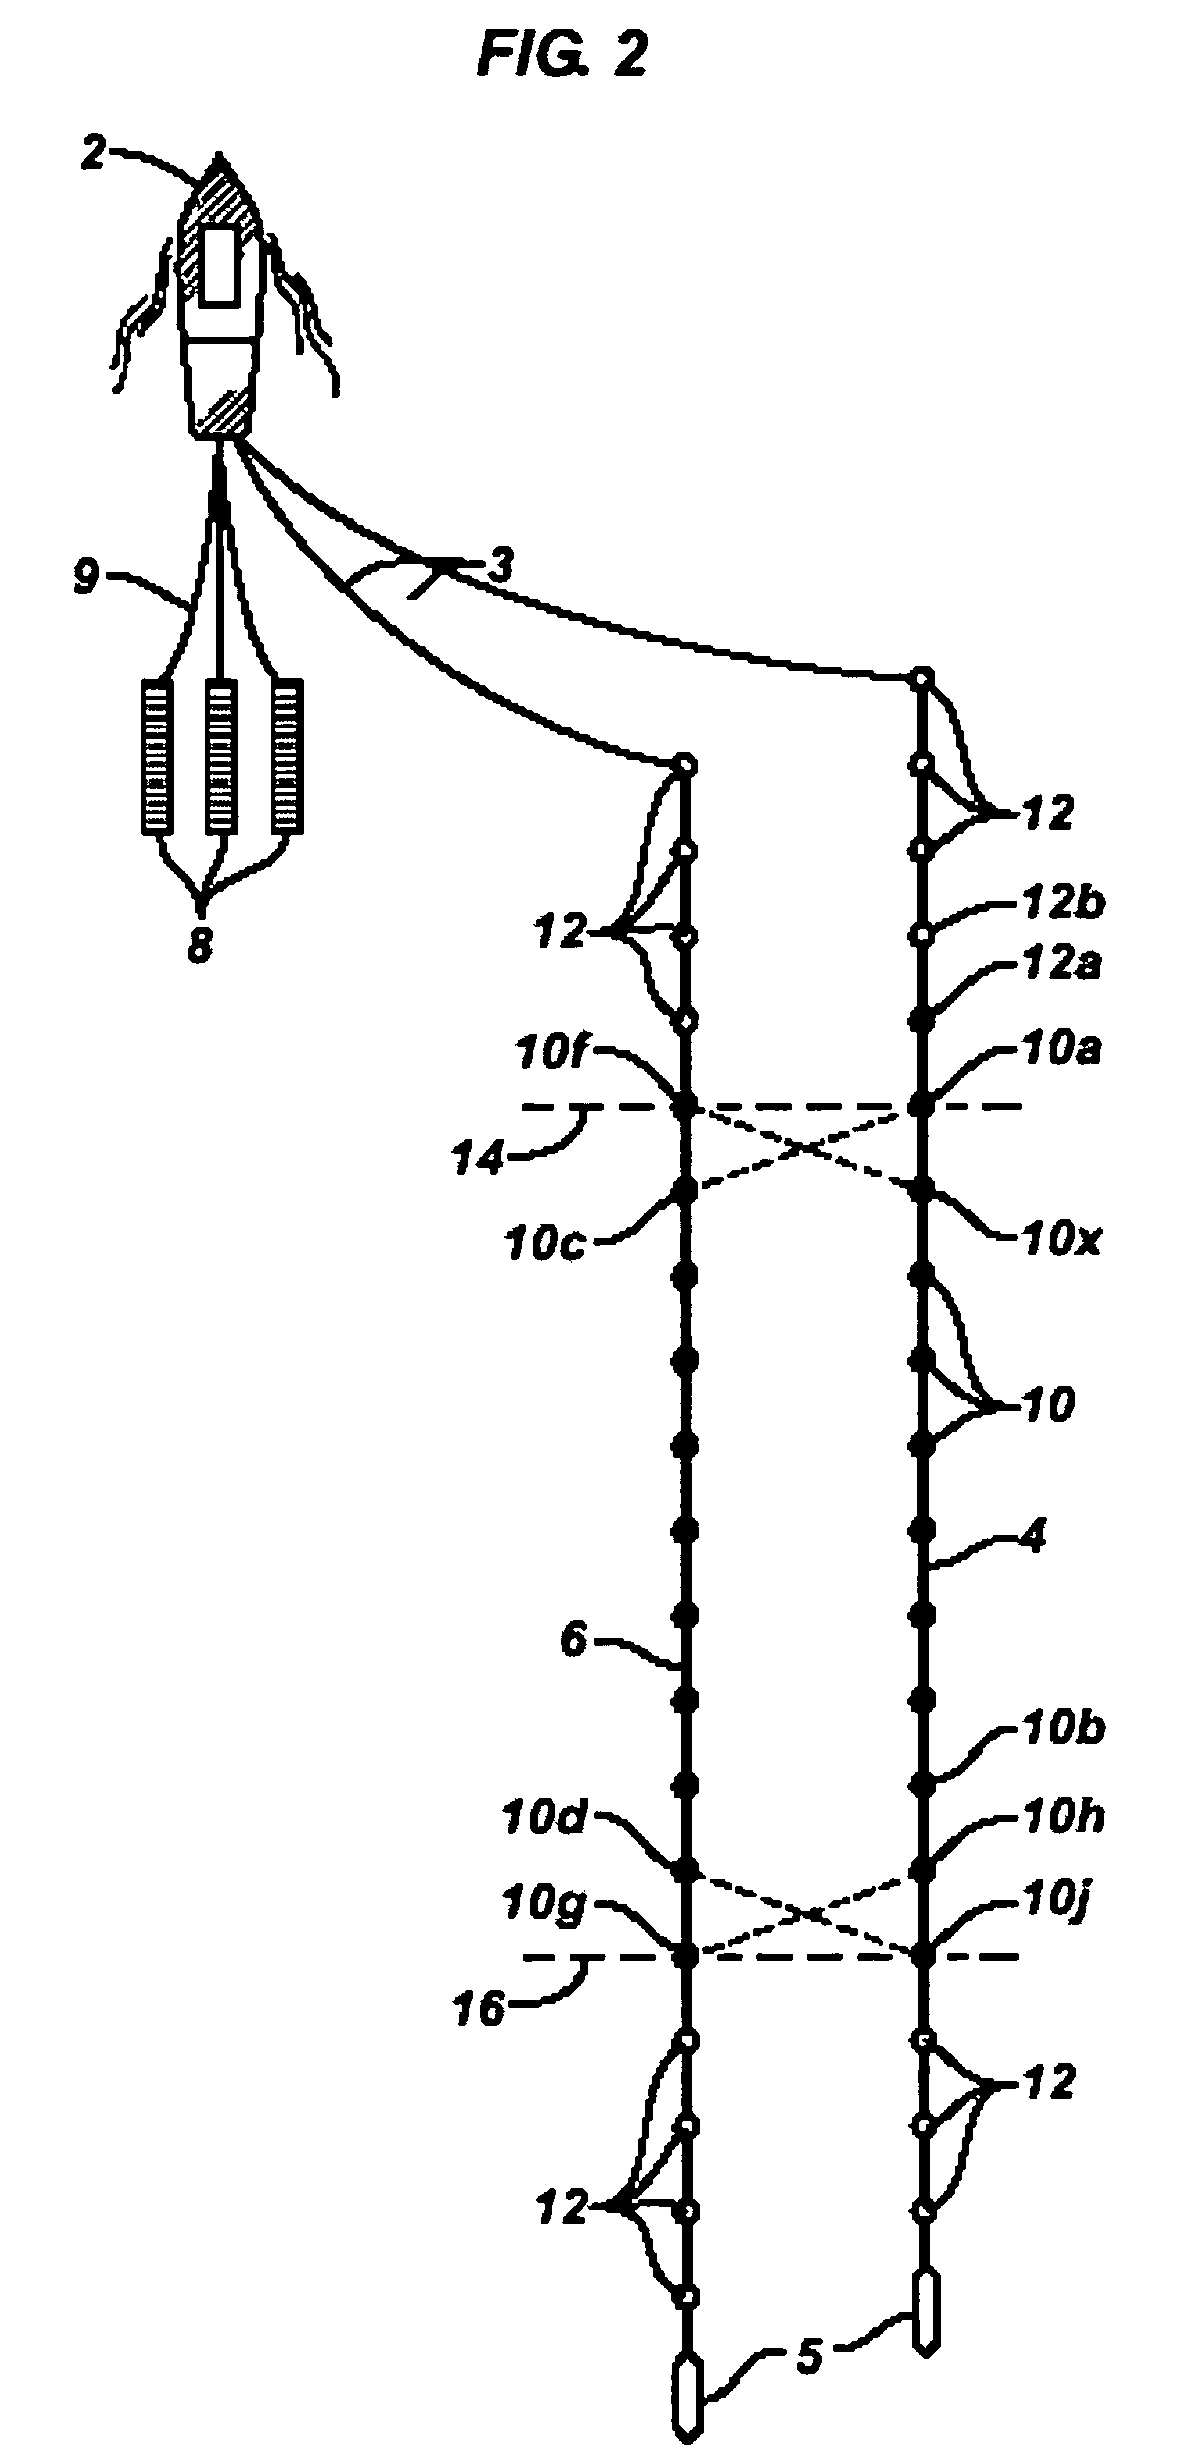 Seismic streamer receiver selection systems and methods